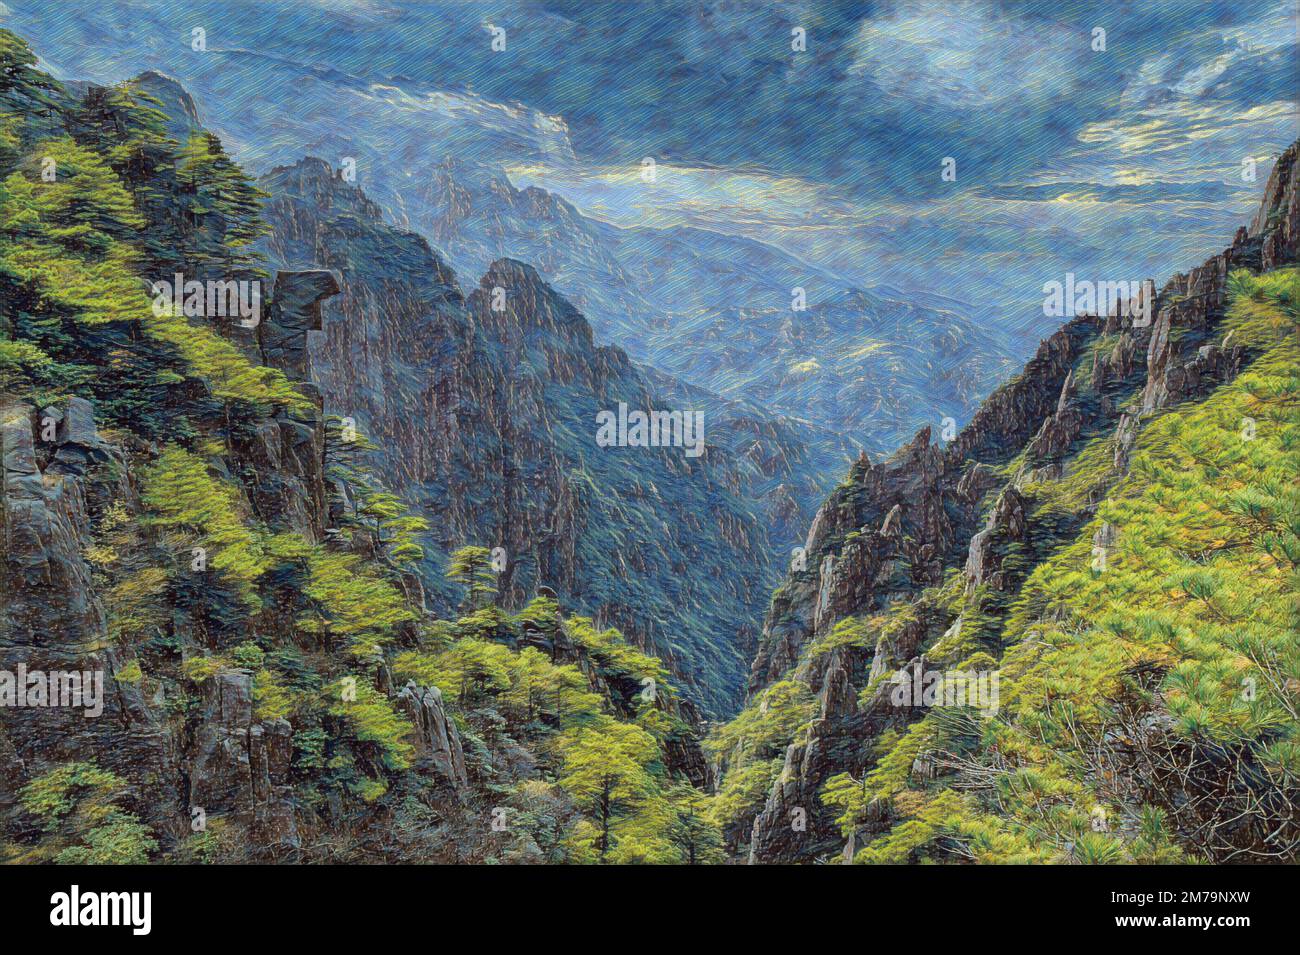 Digital watercolor painting photo of Yellow or Huangshan Mountain in China Stock Photo